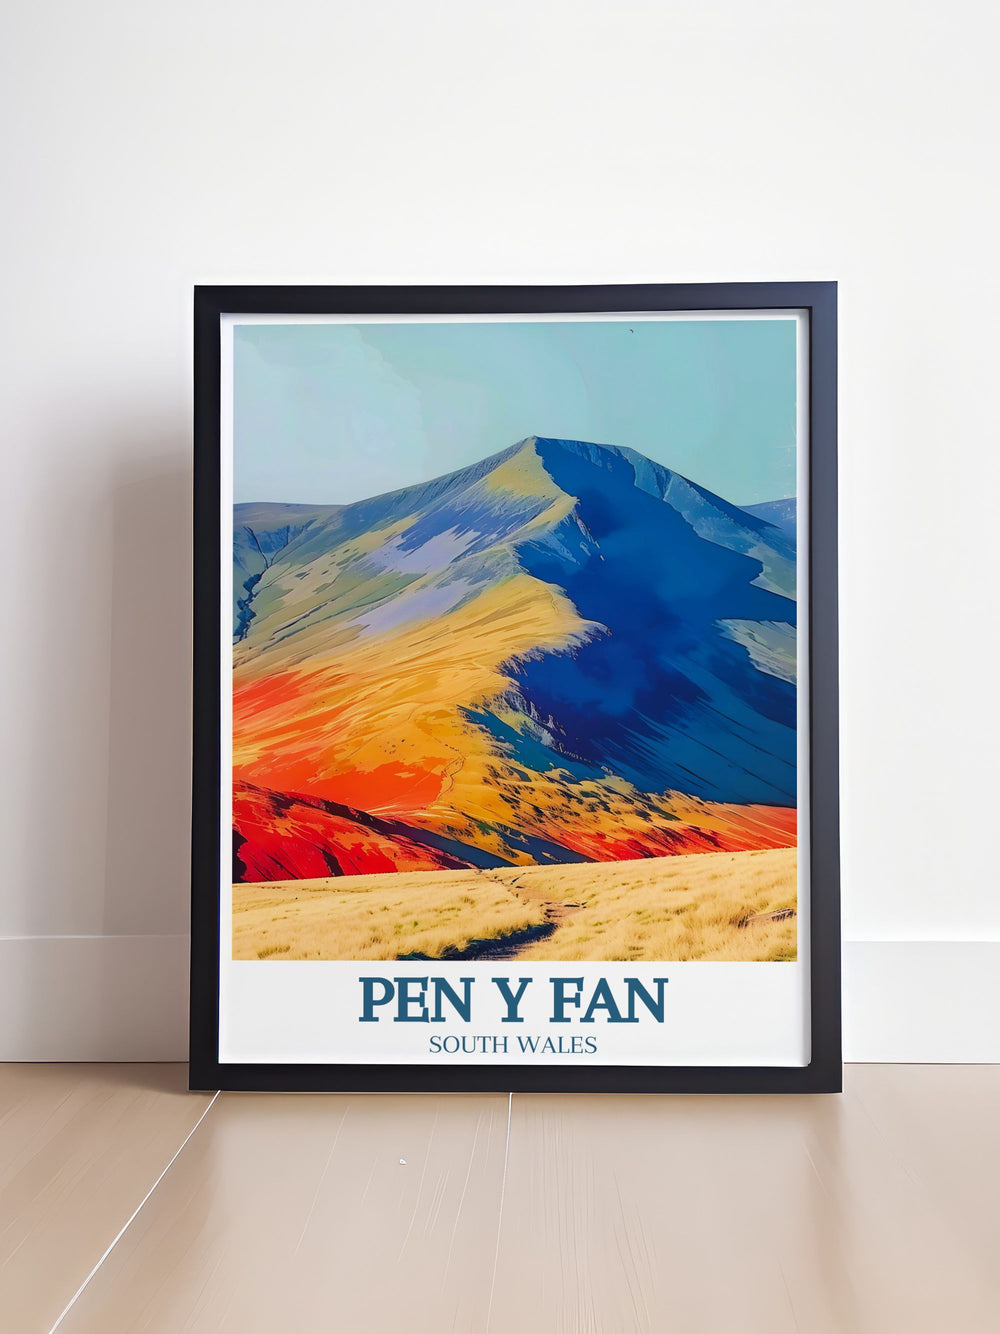 Beautiful Brecon Beacons Travel Poster featuring the iconic Pen Y Fan Mountain. This South Wales art print is ideal for those who appreciate natural landscapes and want to bring a touch of the Welsh countryside into their home decor.